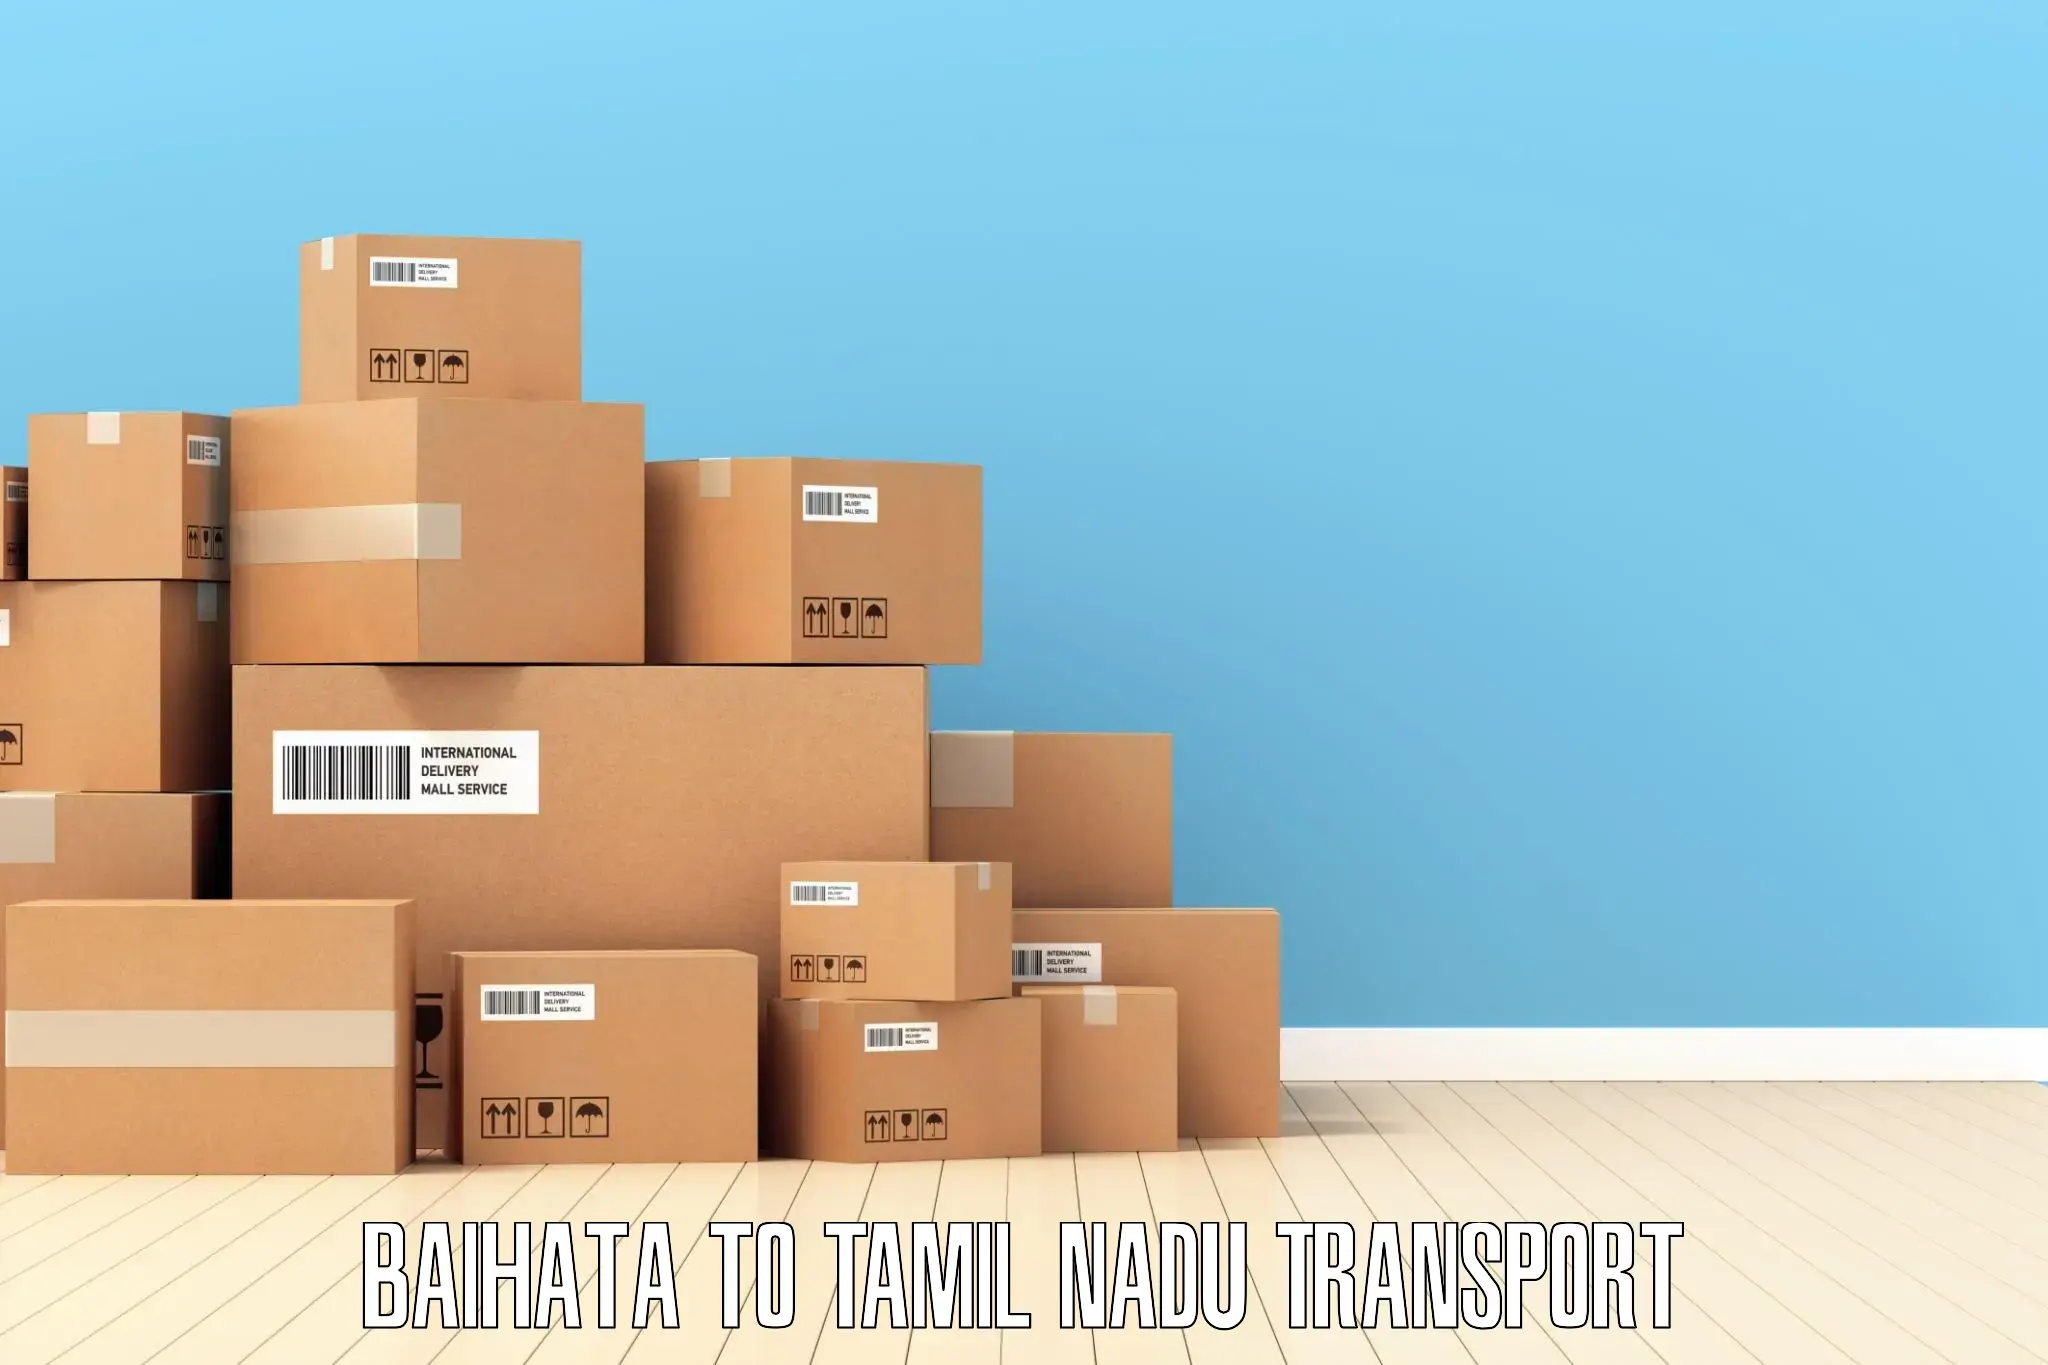 Daily parcel service transport Baihata to Kuttanur